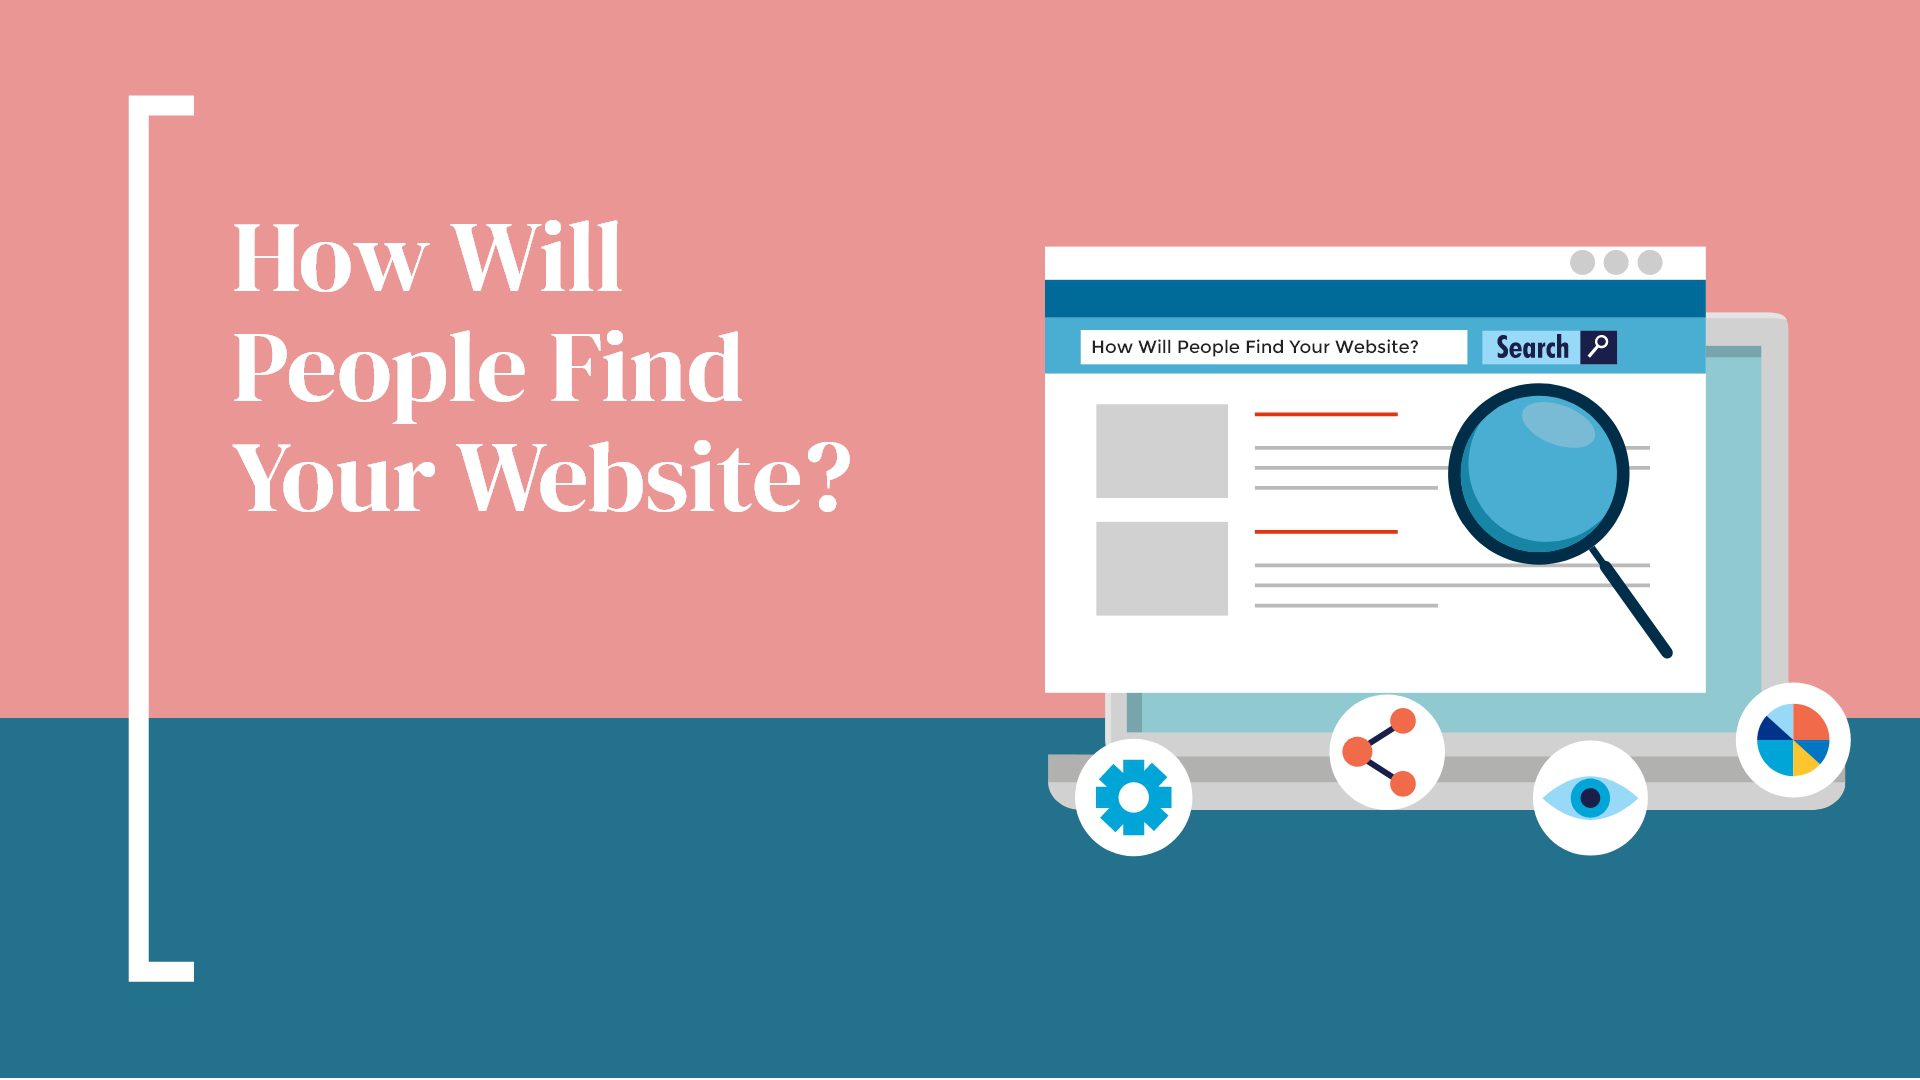 How Will People Find Your Website?